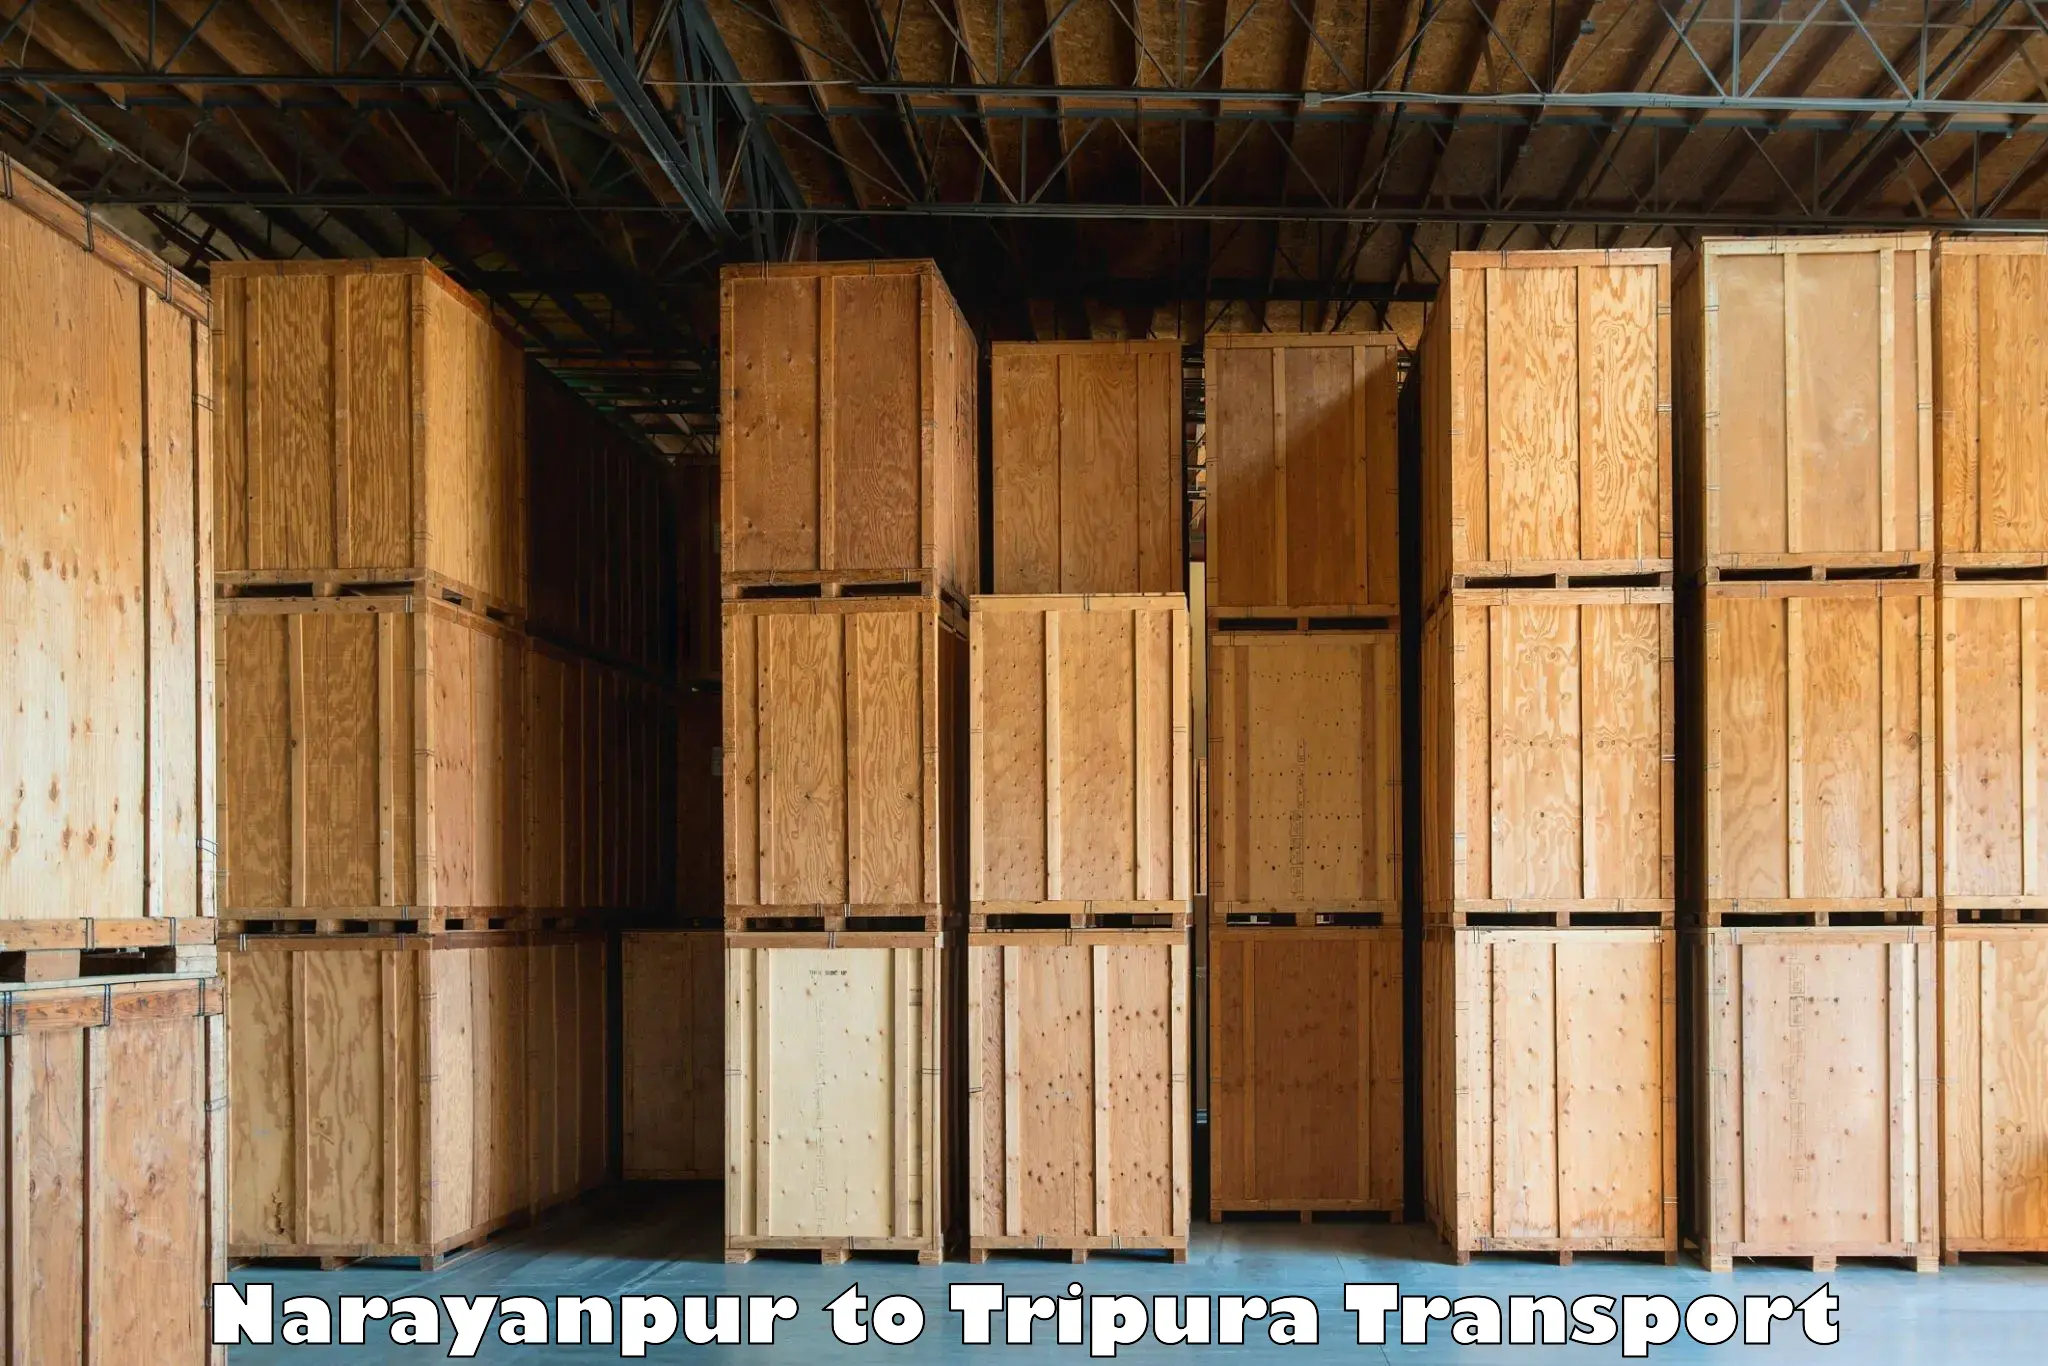 Container transport service Narayanpur to Tripura